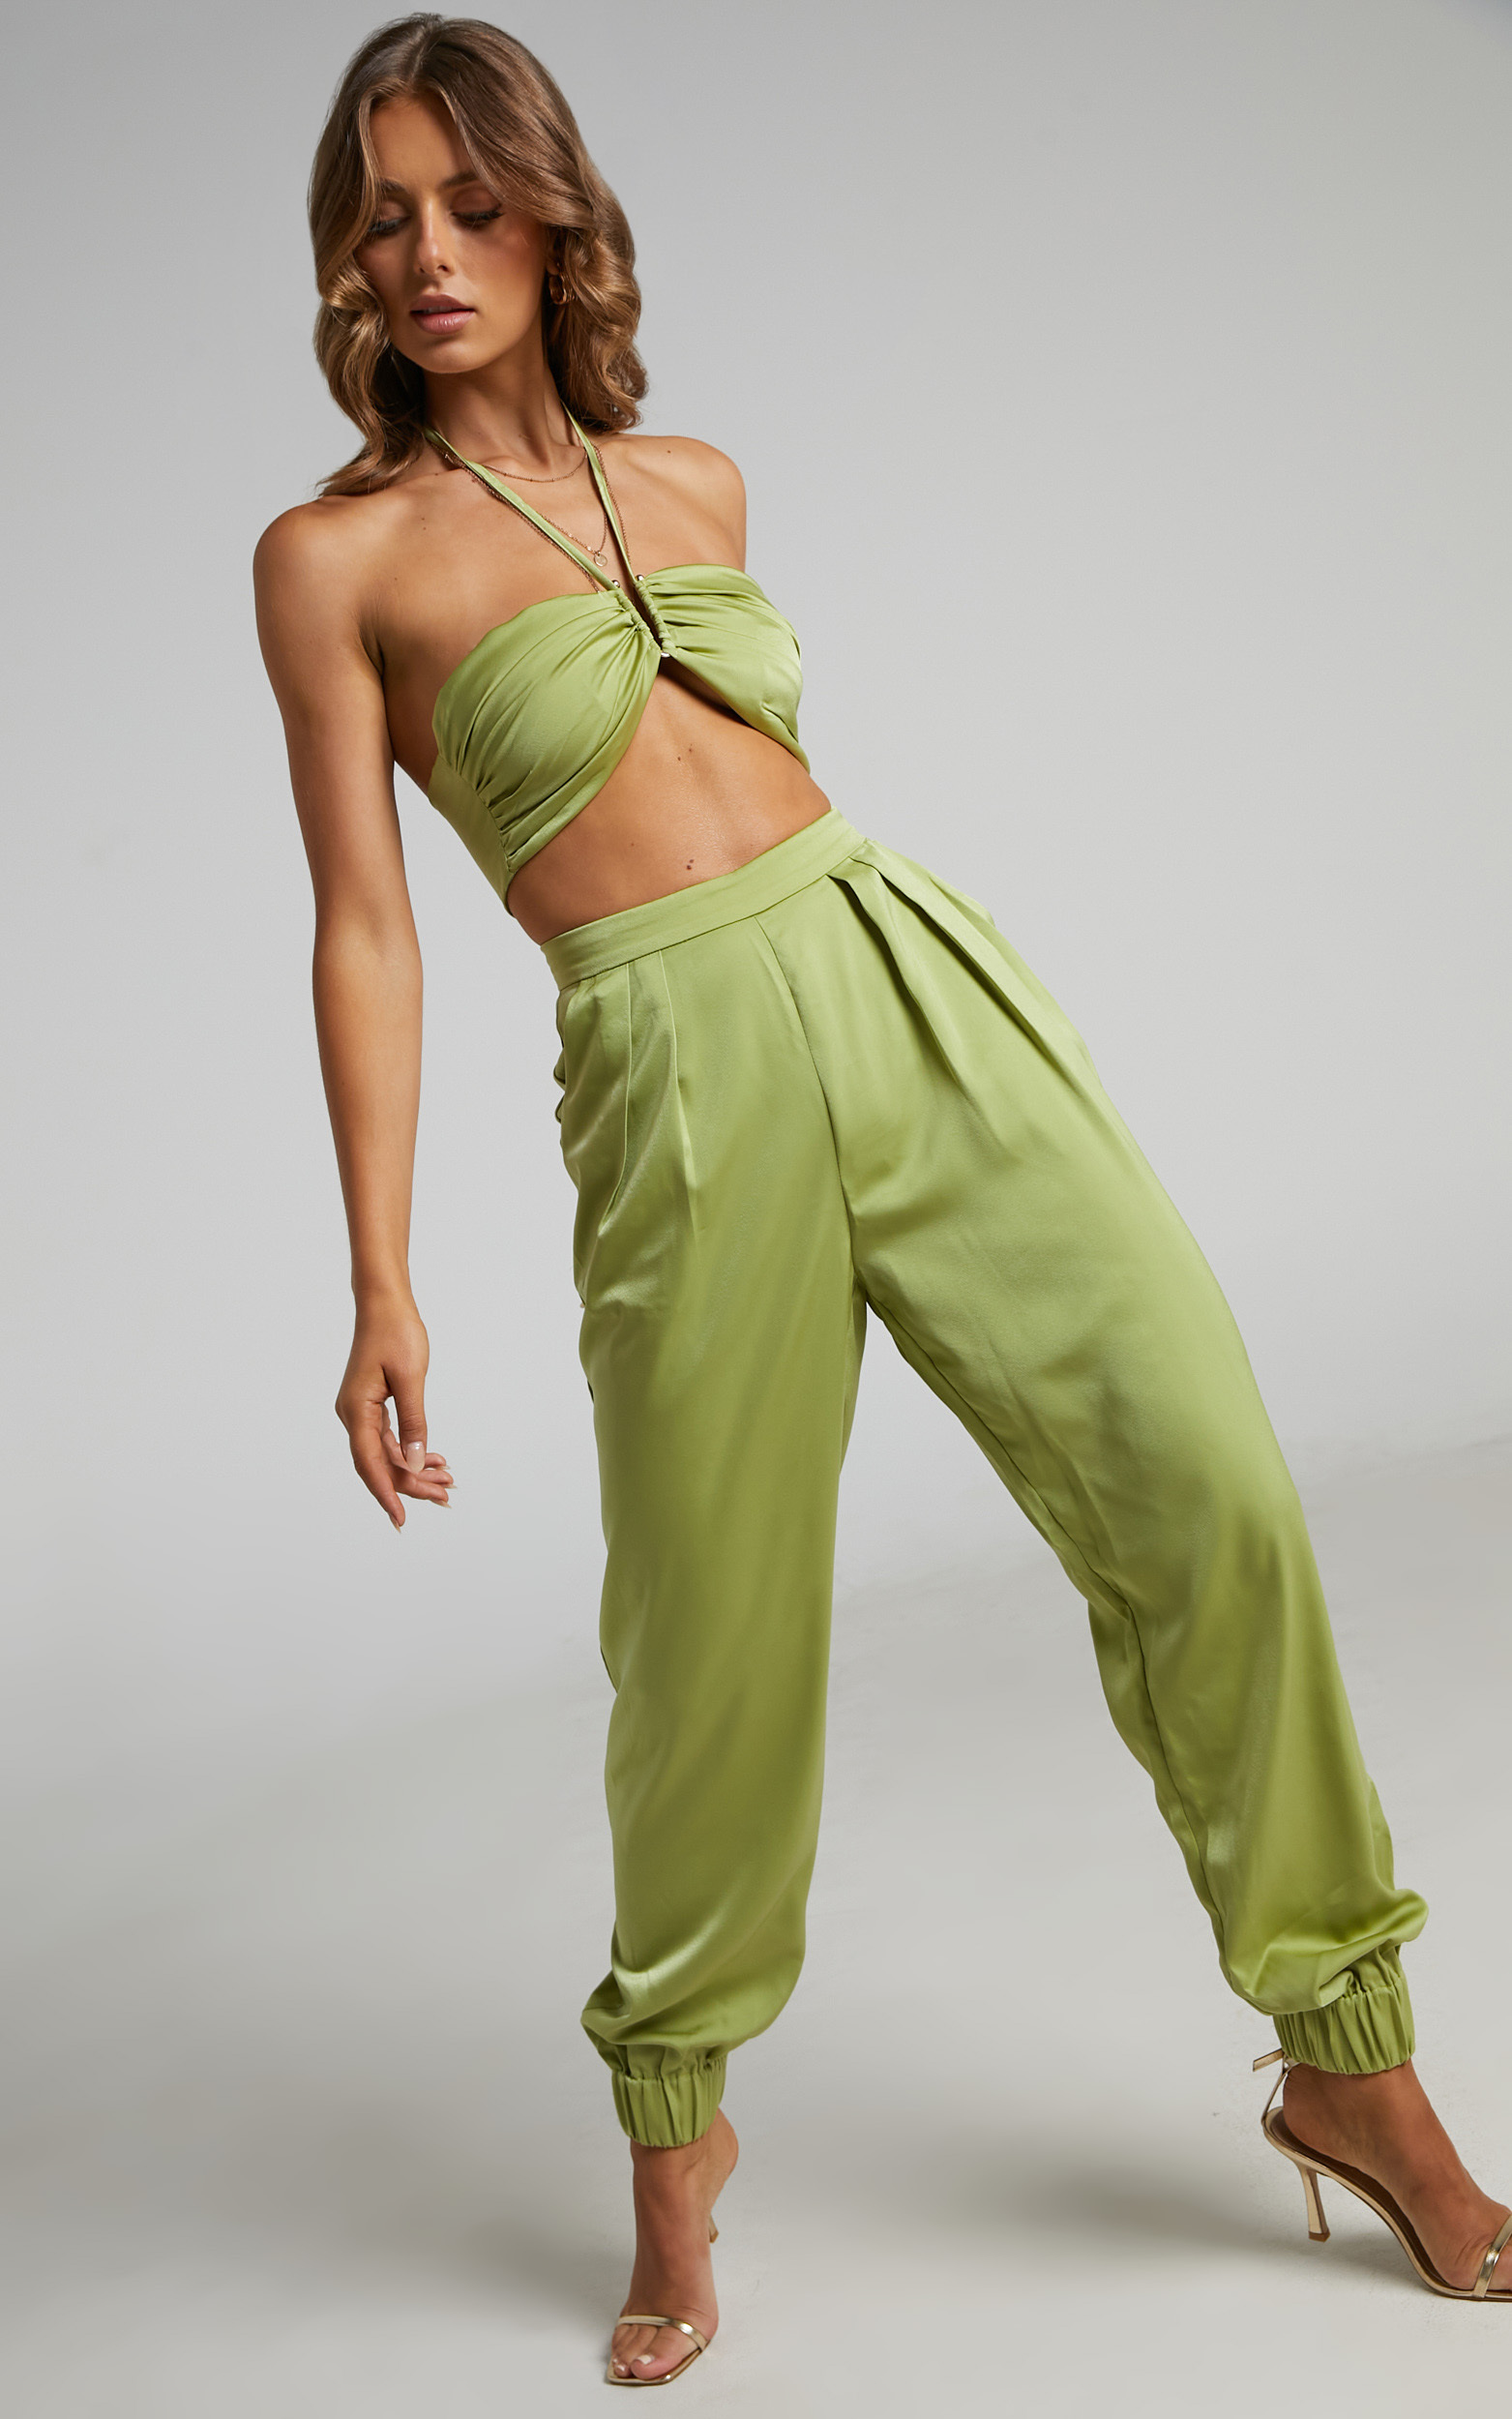 Lucine Halter Crop Top and Tailored Jogger Pants Two Piece Set in Green - 06, GRN1, hi-res image number null